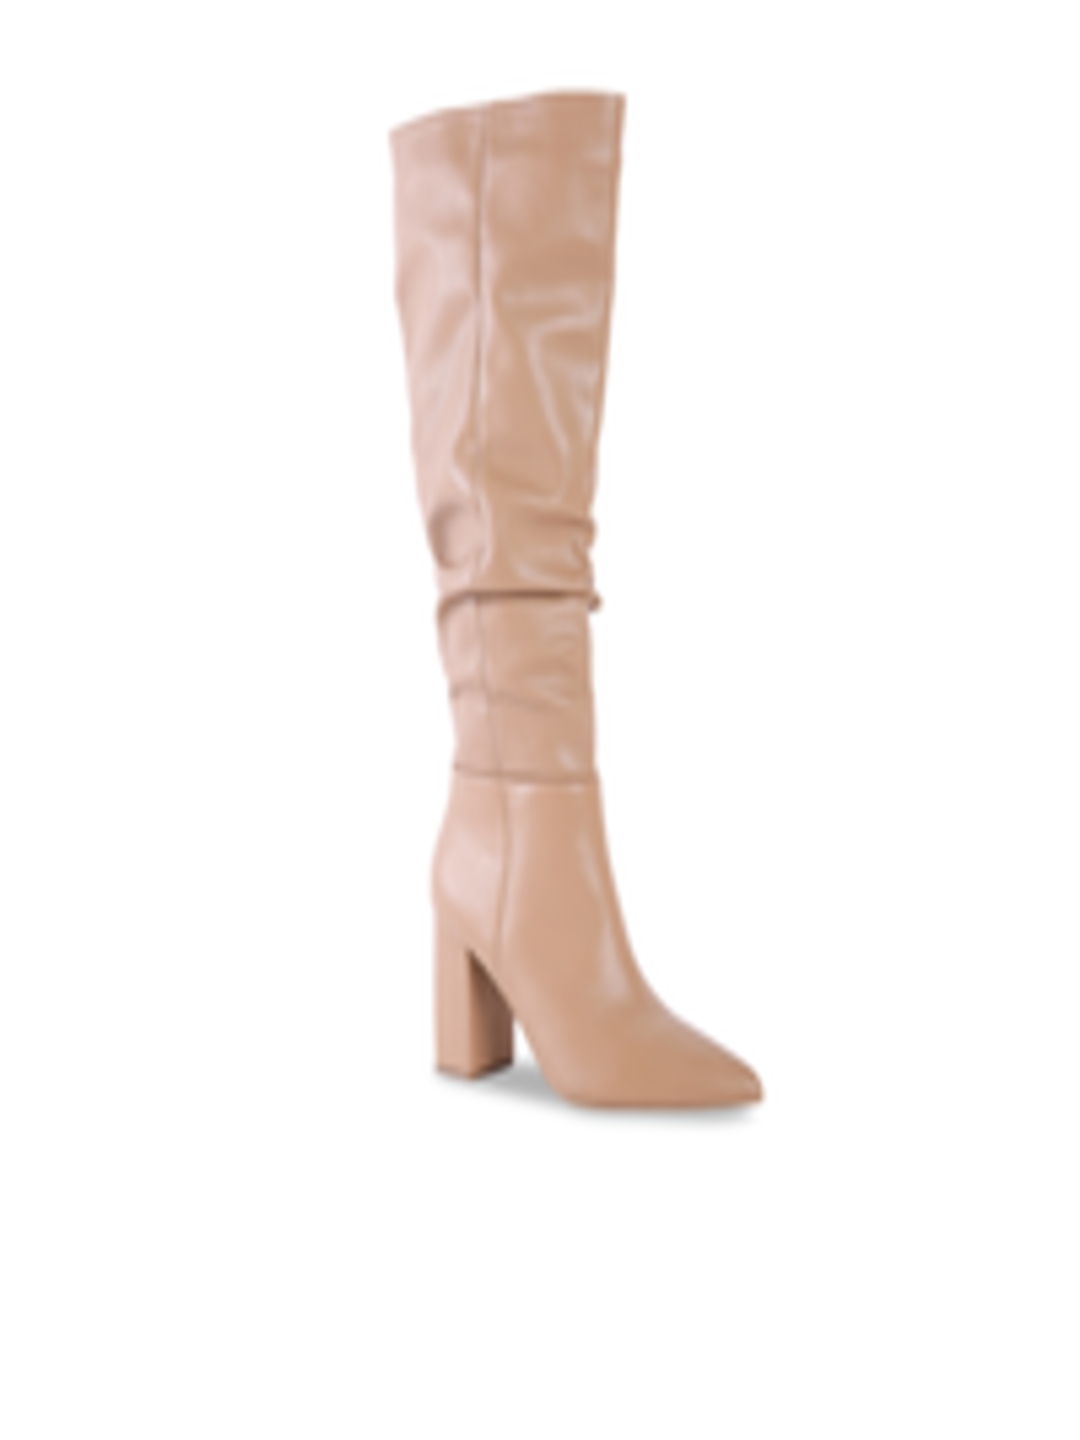 Buy London Rag Taupe High Top Block Heeled Boots - Boots for Women 16920524 | Myntra